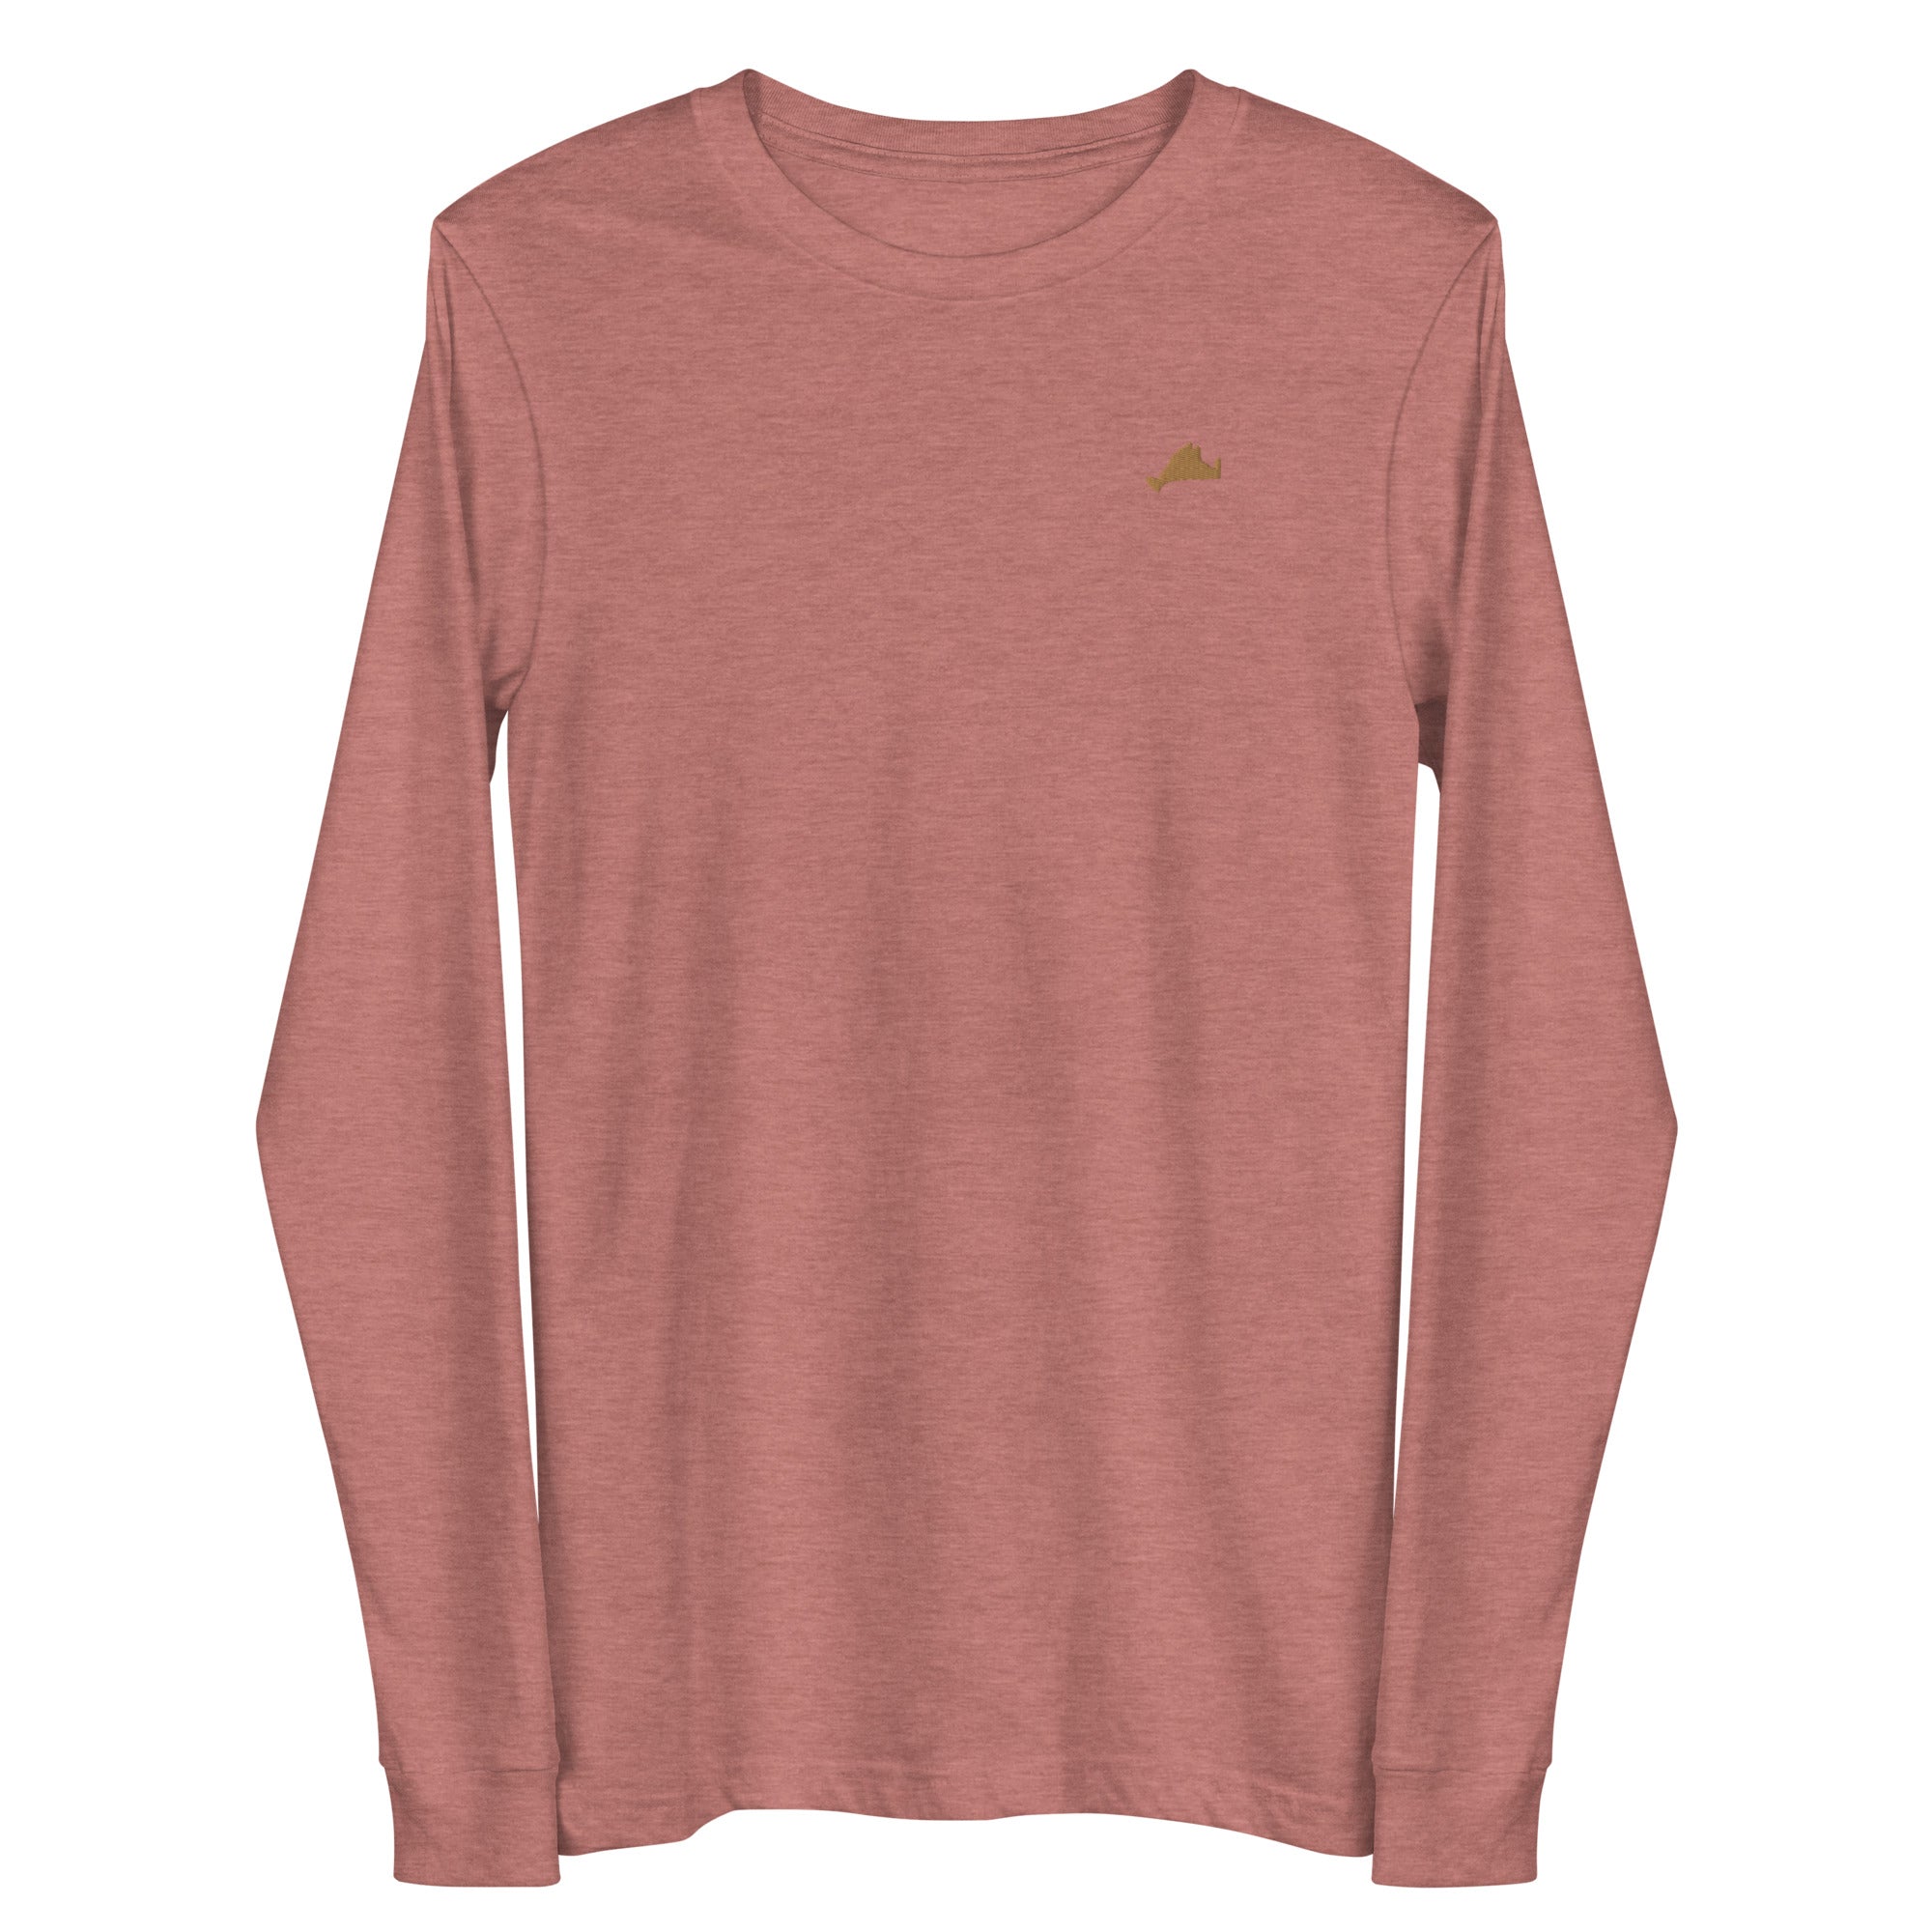 Gold  Embroidered Long Sleeve Tee Shirt